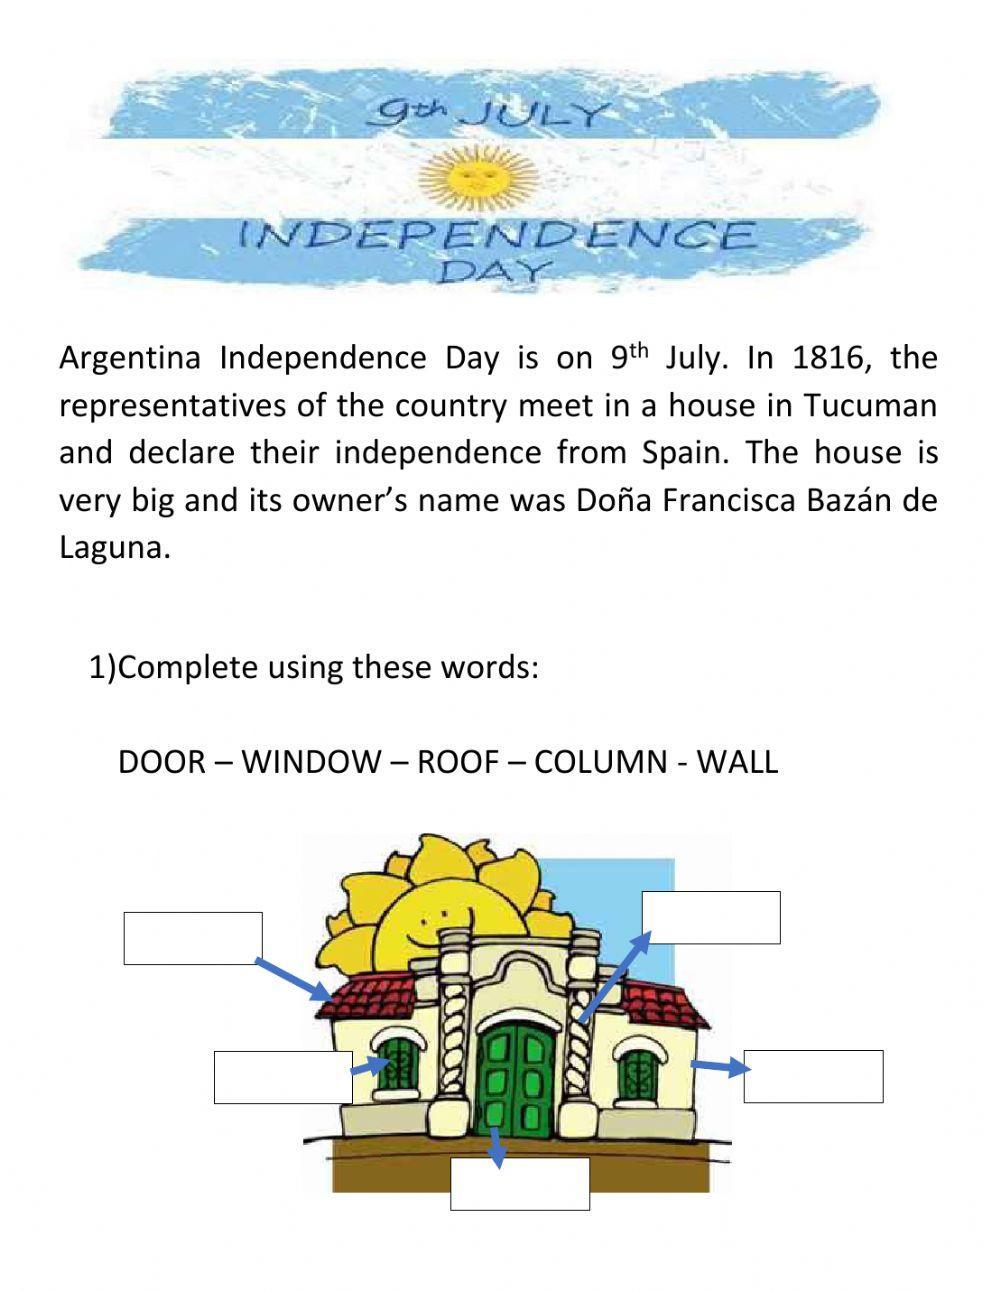 Argentina Independence Day- 9th July